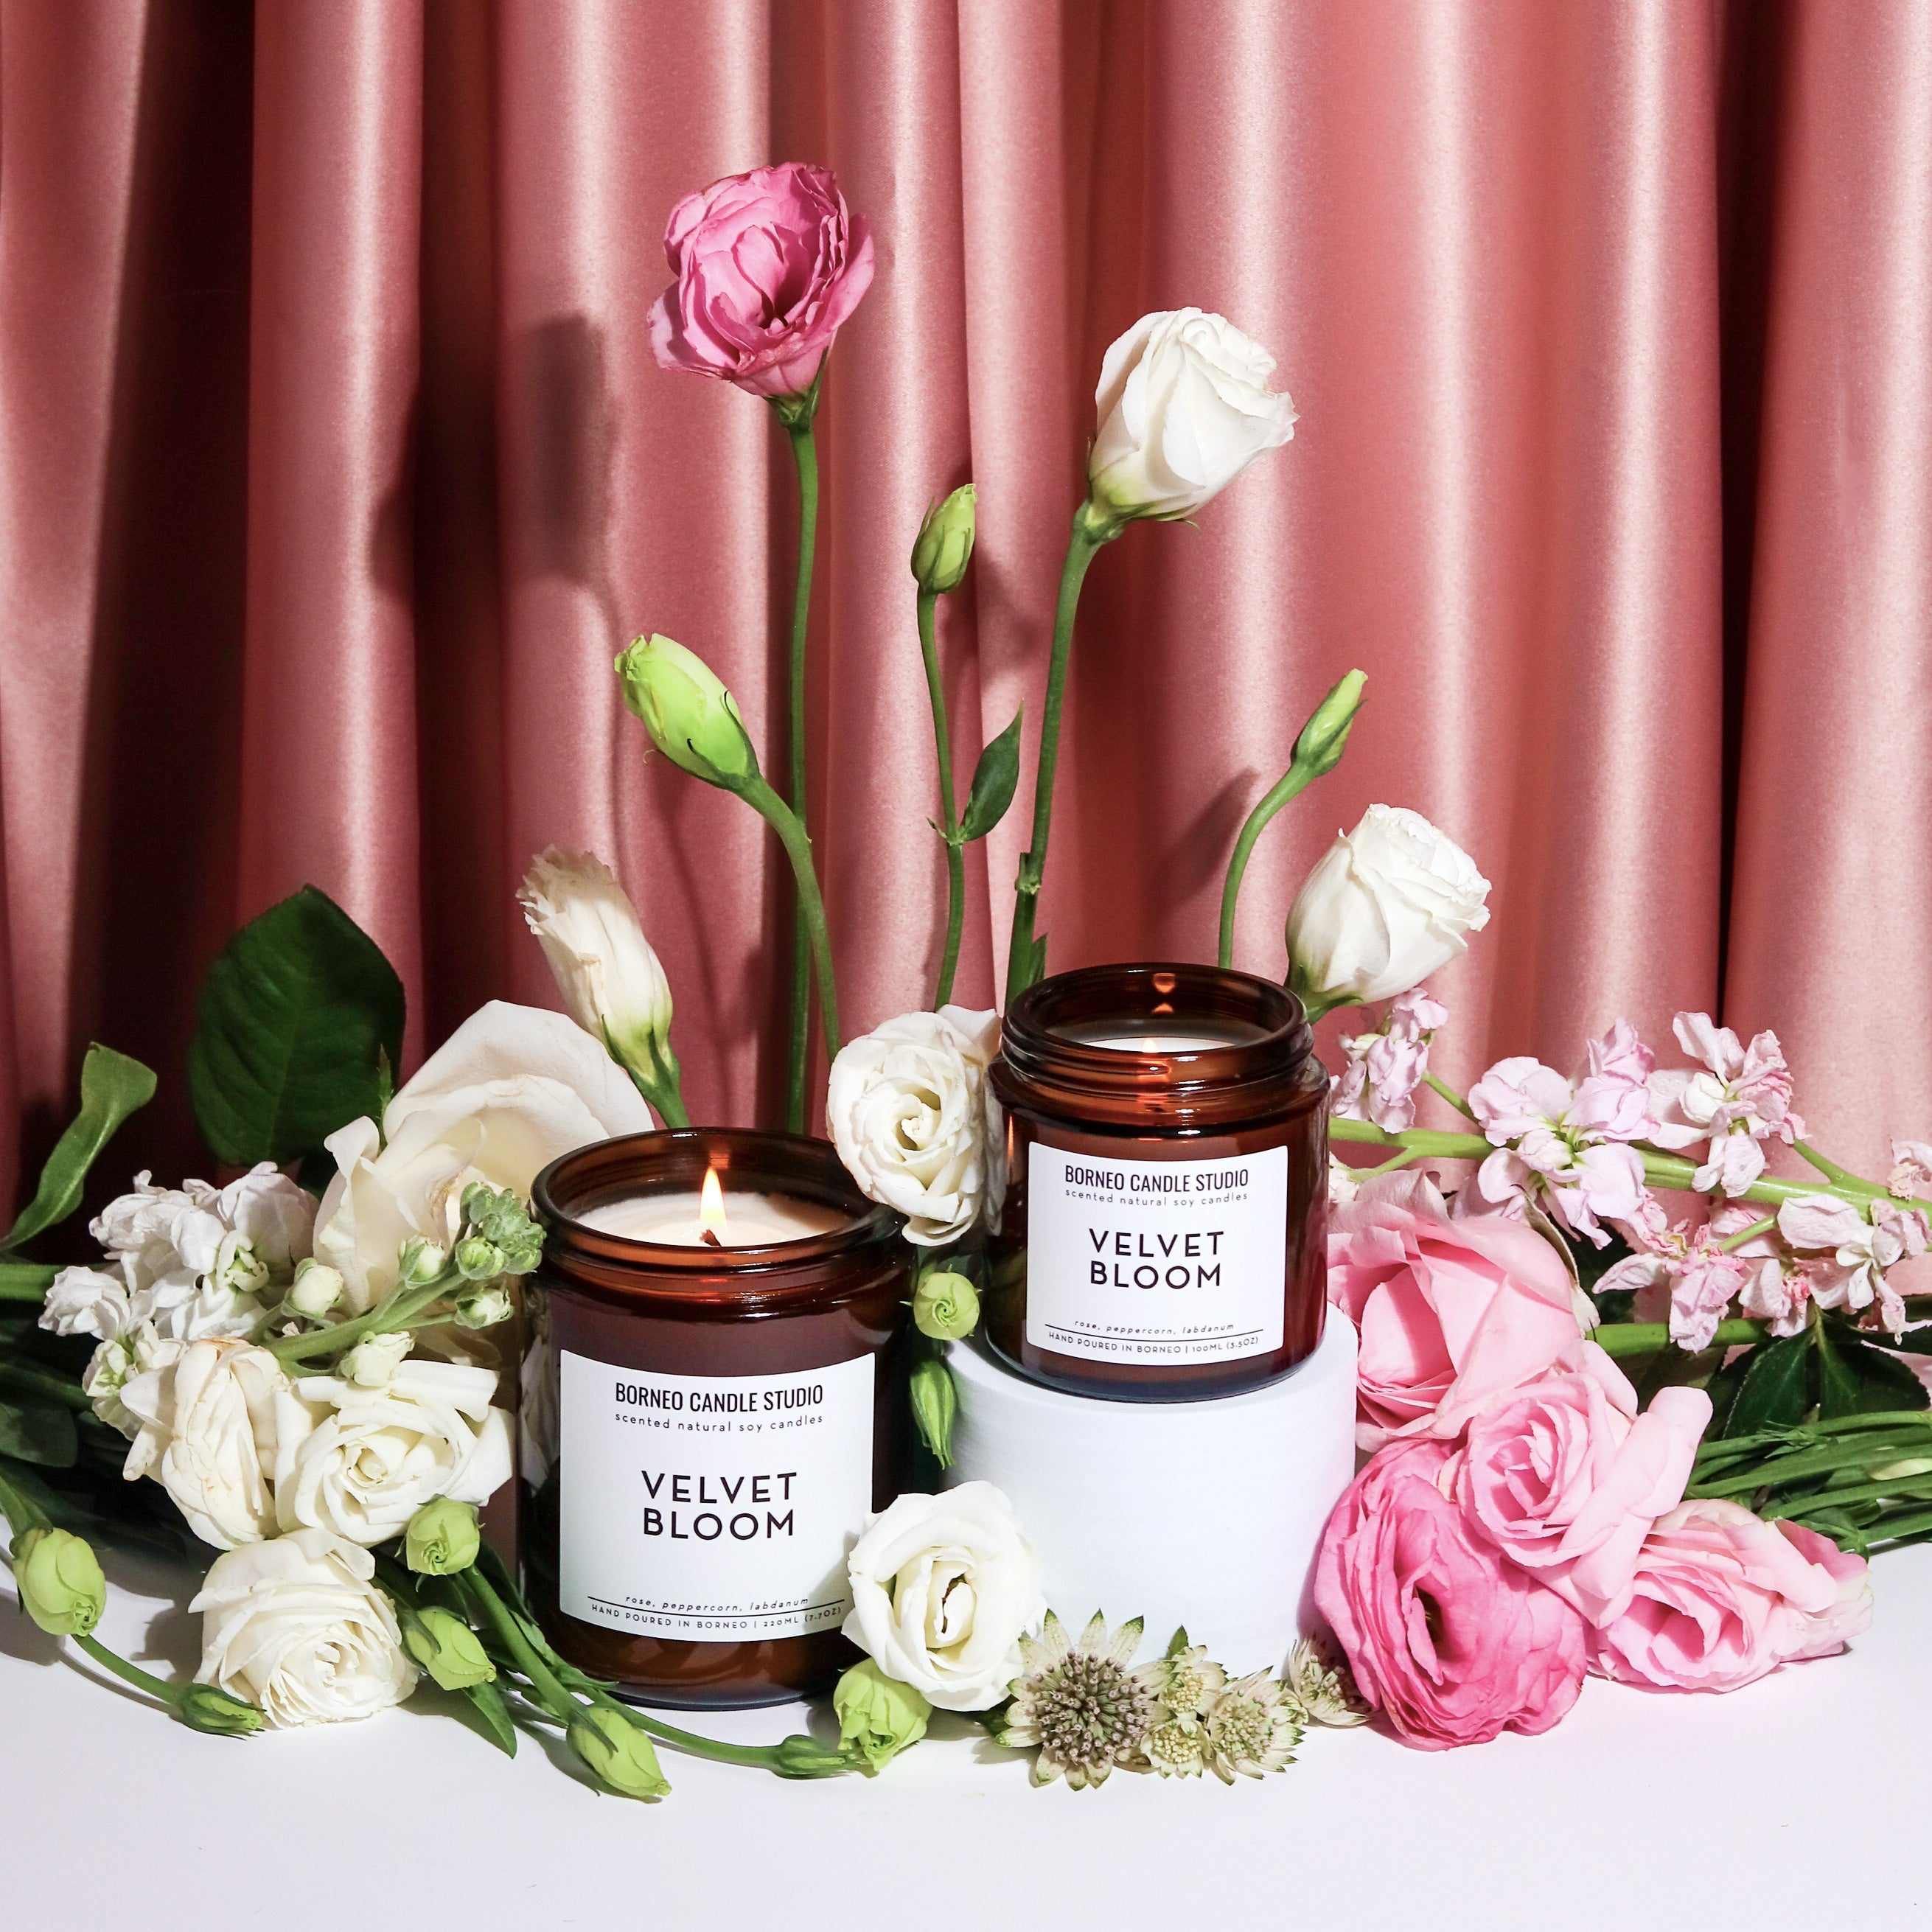 Floral scented candle called Velvet Bloom by Borneo Candle Studio. The scent contains notes of rose, peppercorn and labdanum